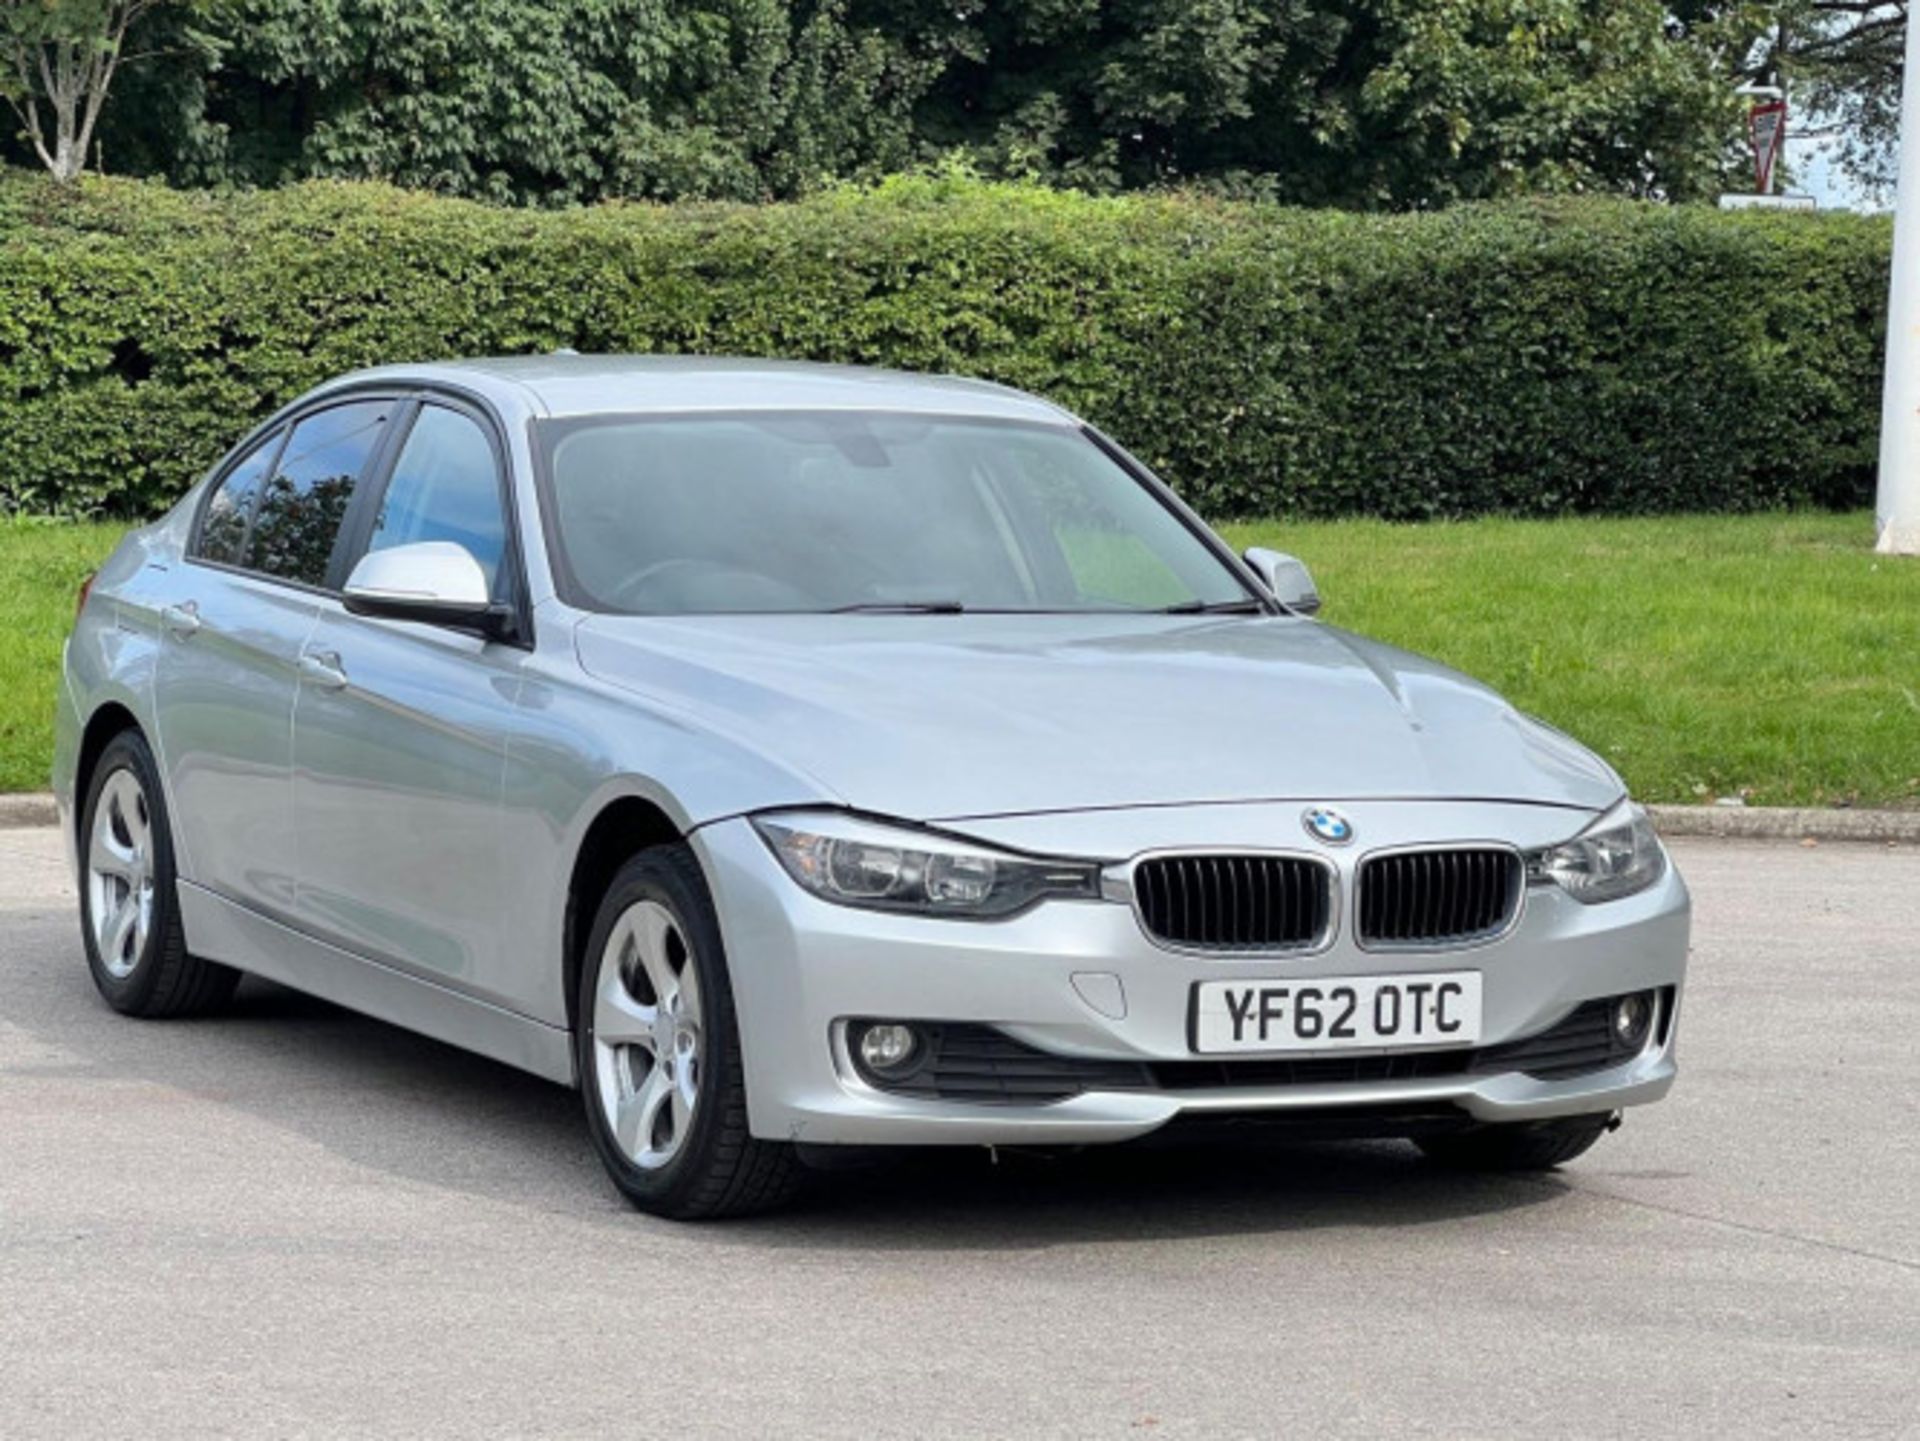 BMW 3 SERIES 2.0 DIESEL ED START STOP - A WELL-MAINTAINED GEM >>--NO VAT ON HAMMER--<< - Image 11 of 229